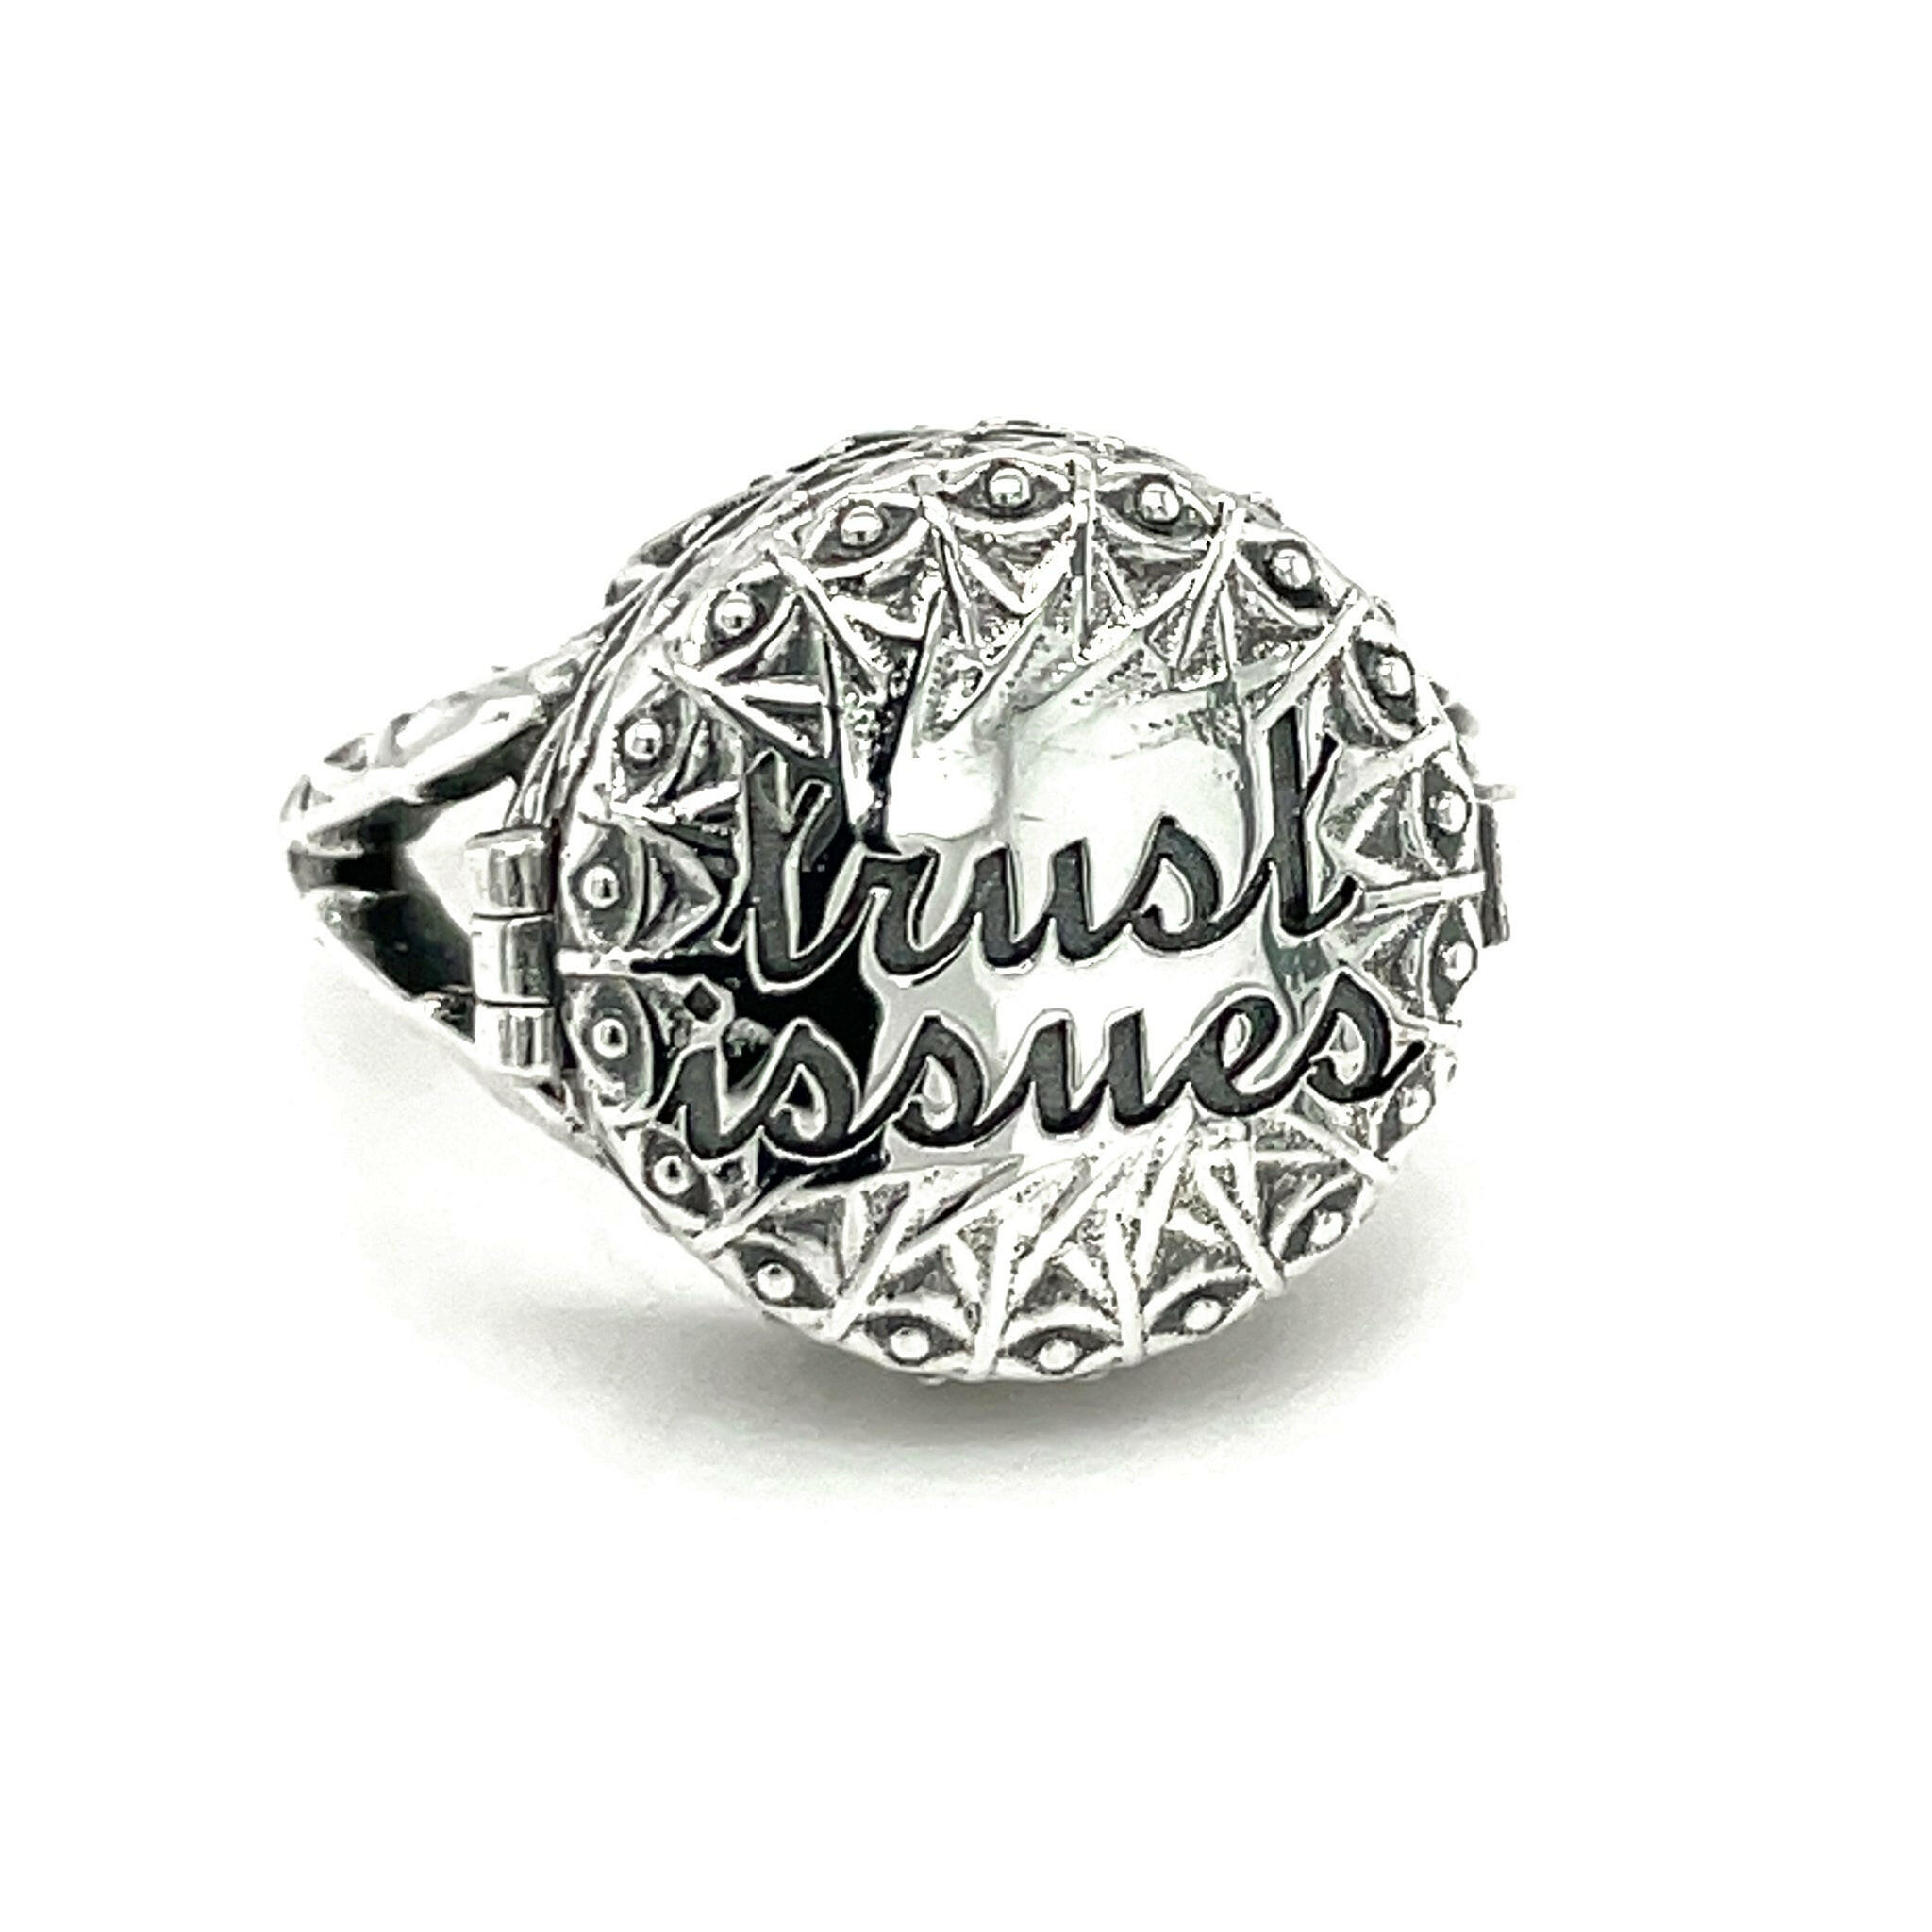 Trust Issues - Ilah Cibis Jewelry-Rings